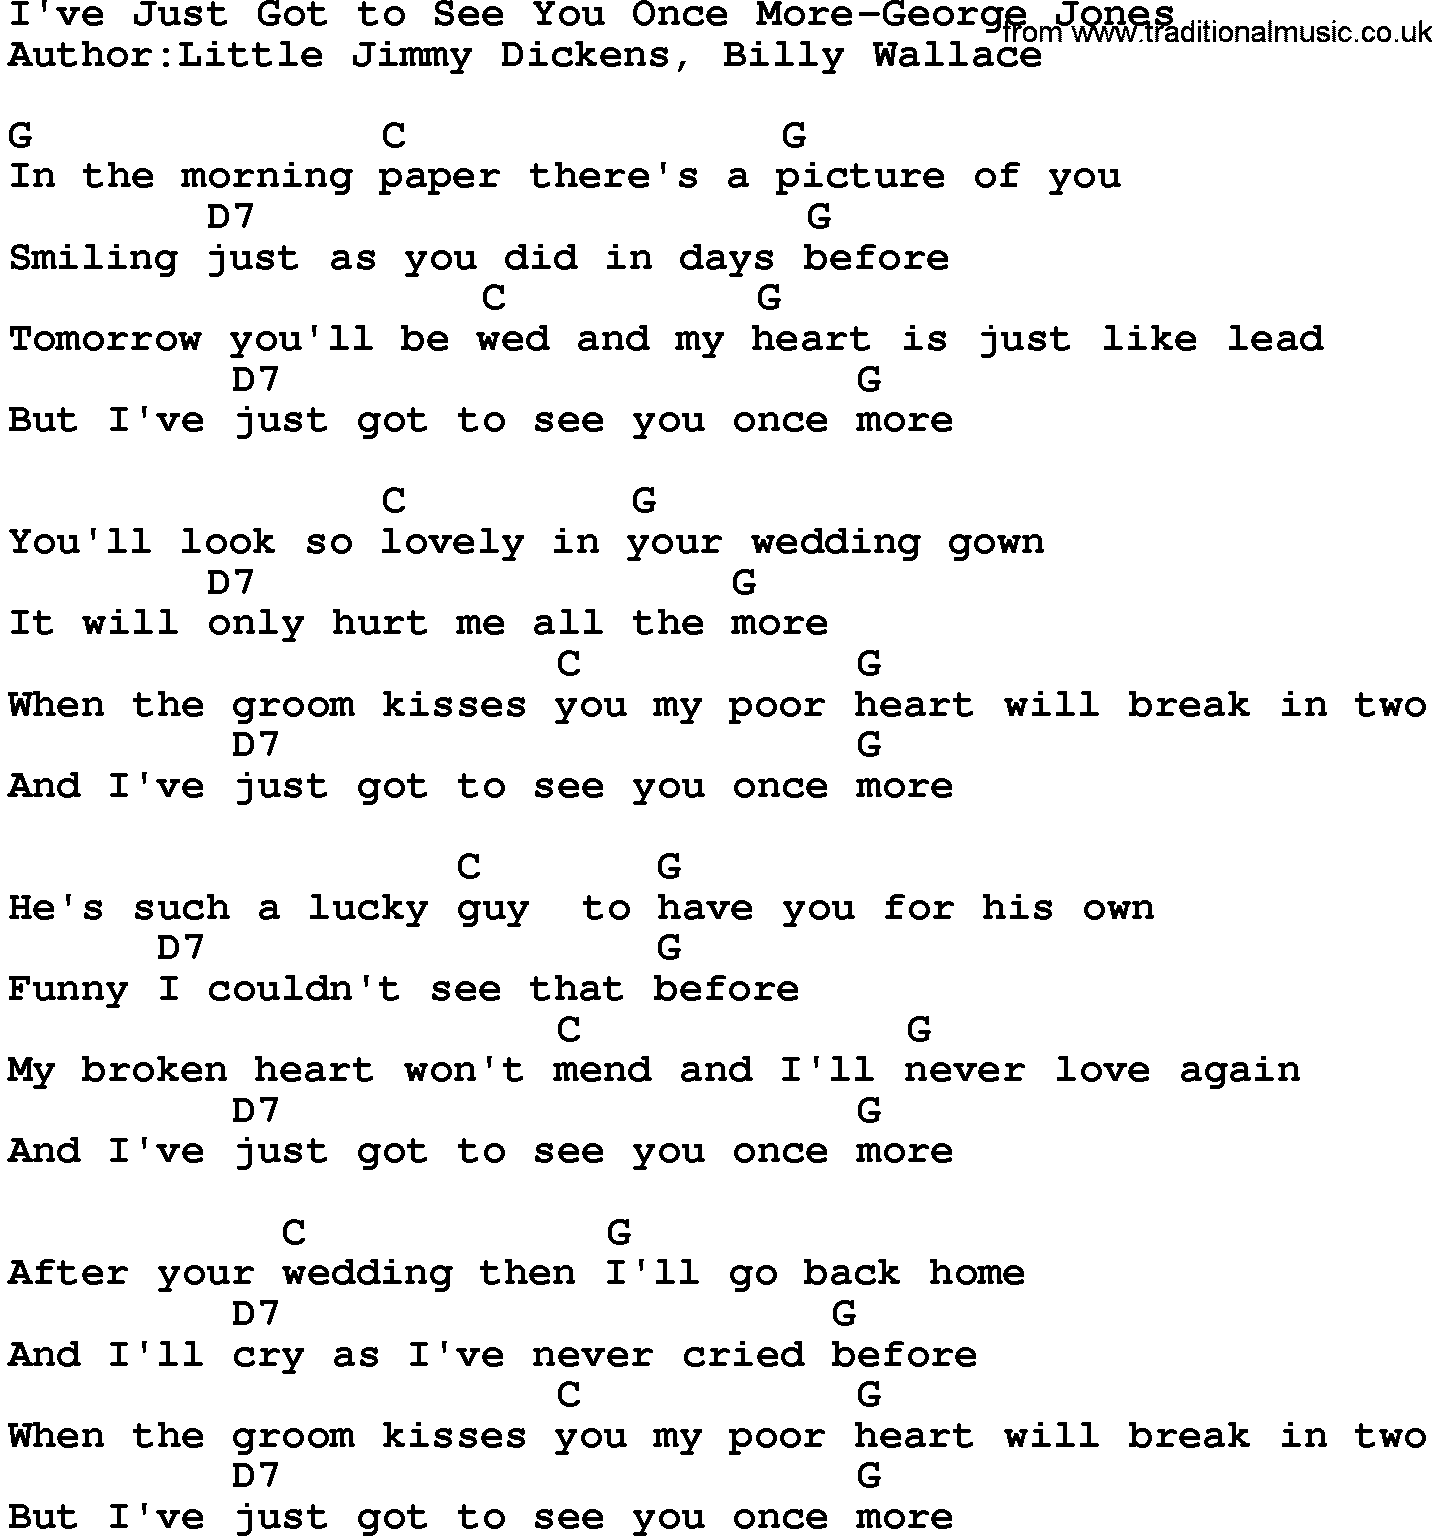 Country music song: I've Just Got To See You Once More-George Jones lyrics and chords